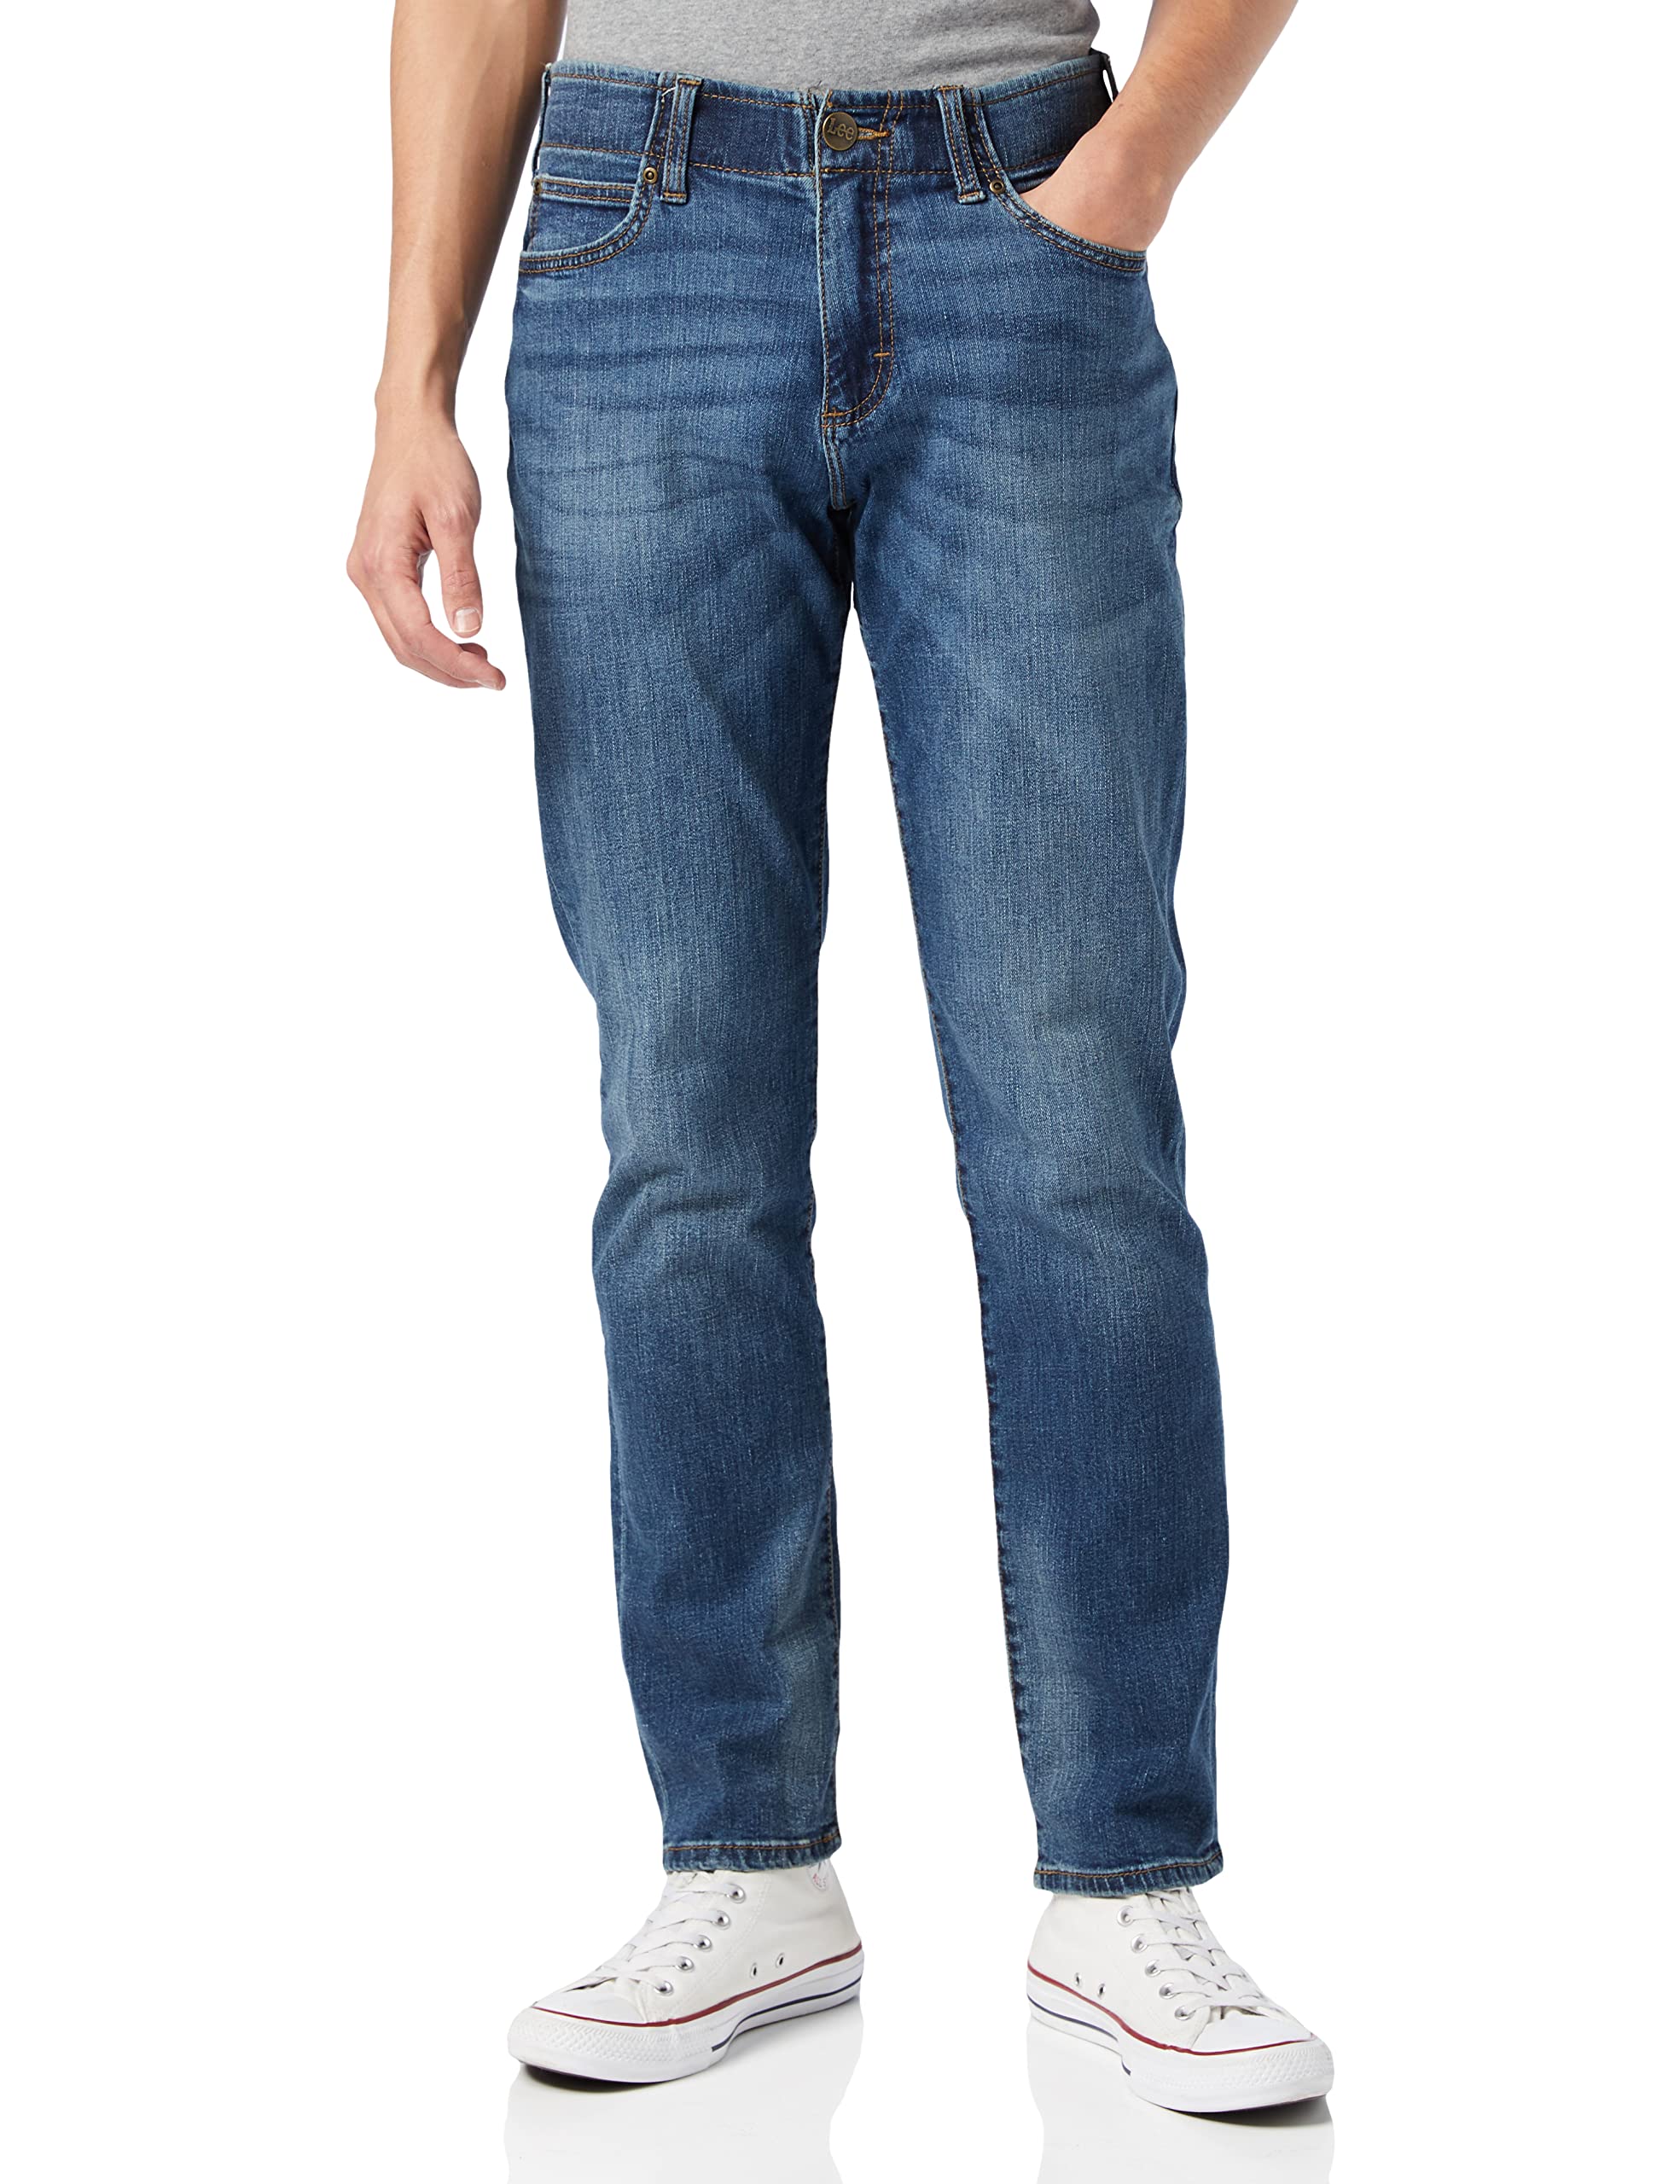 Lee Herren Straight Fit Xm Extreme Motion Jeans, Maddox, 36W / 32L